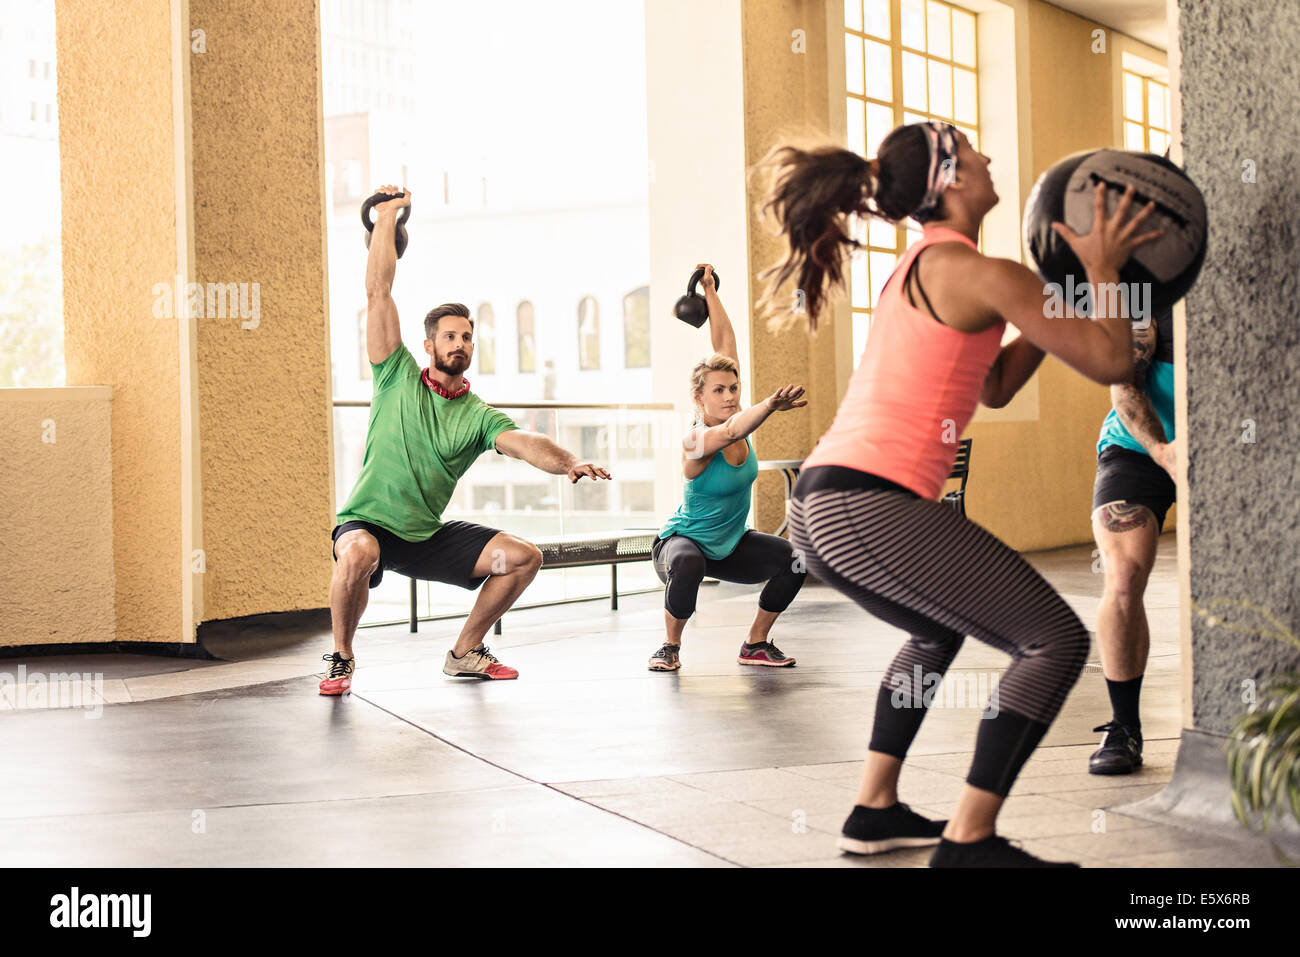 Group of adults doing workout Stock Photo